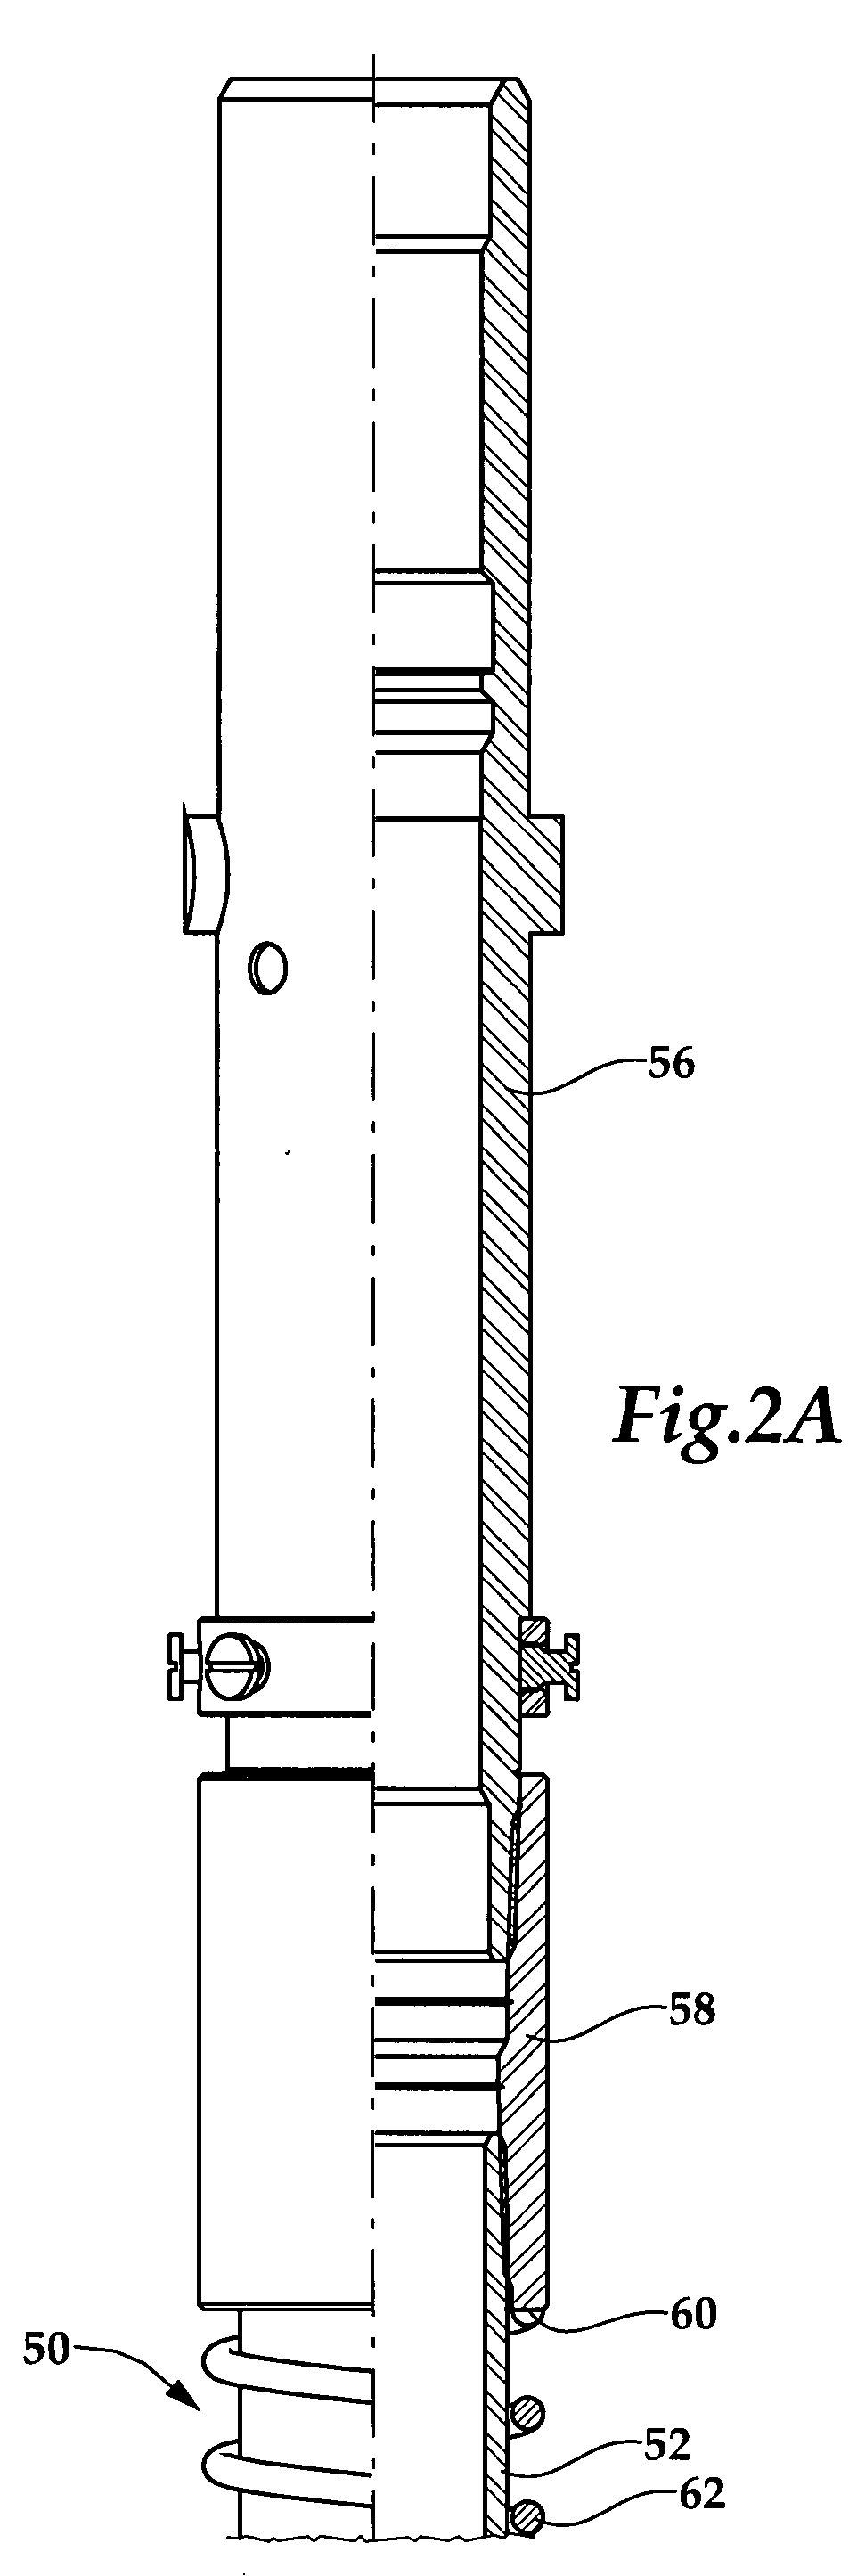 Downhole seal assembly having embedded sensors and method for use of same